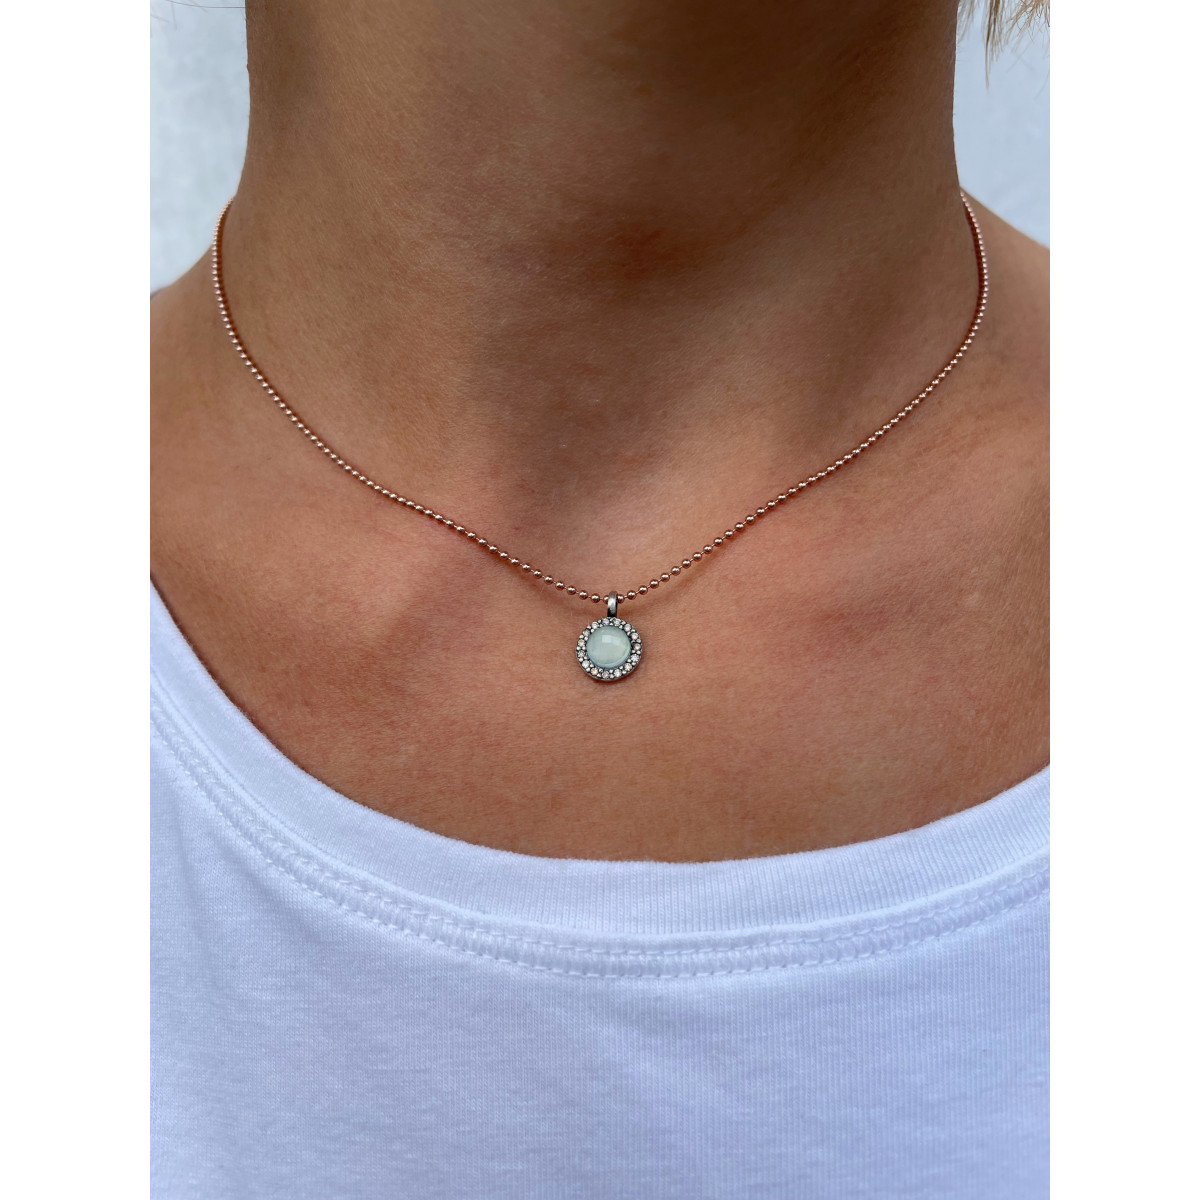 CHALCEDONY SUNFIELD NECKLACE - CL060634